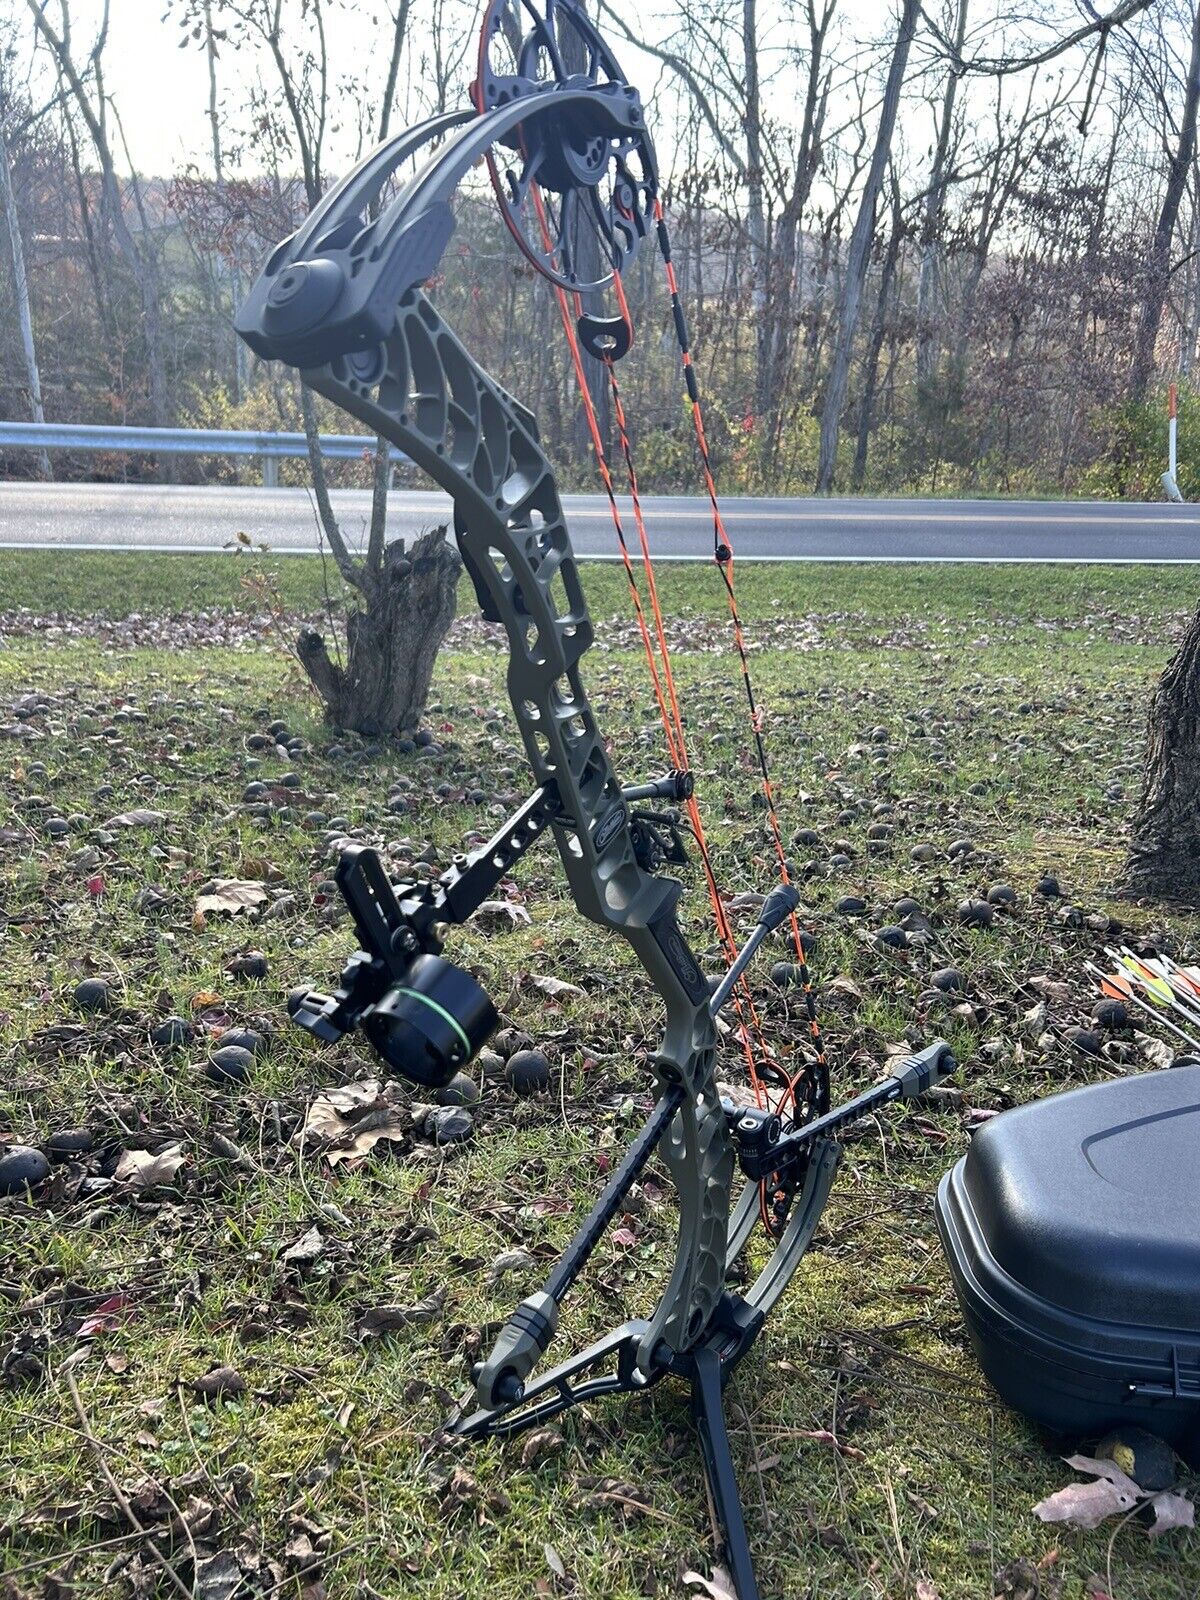 Mathews Phase 4 33 Will Sell For 2300 Without Sight